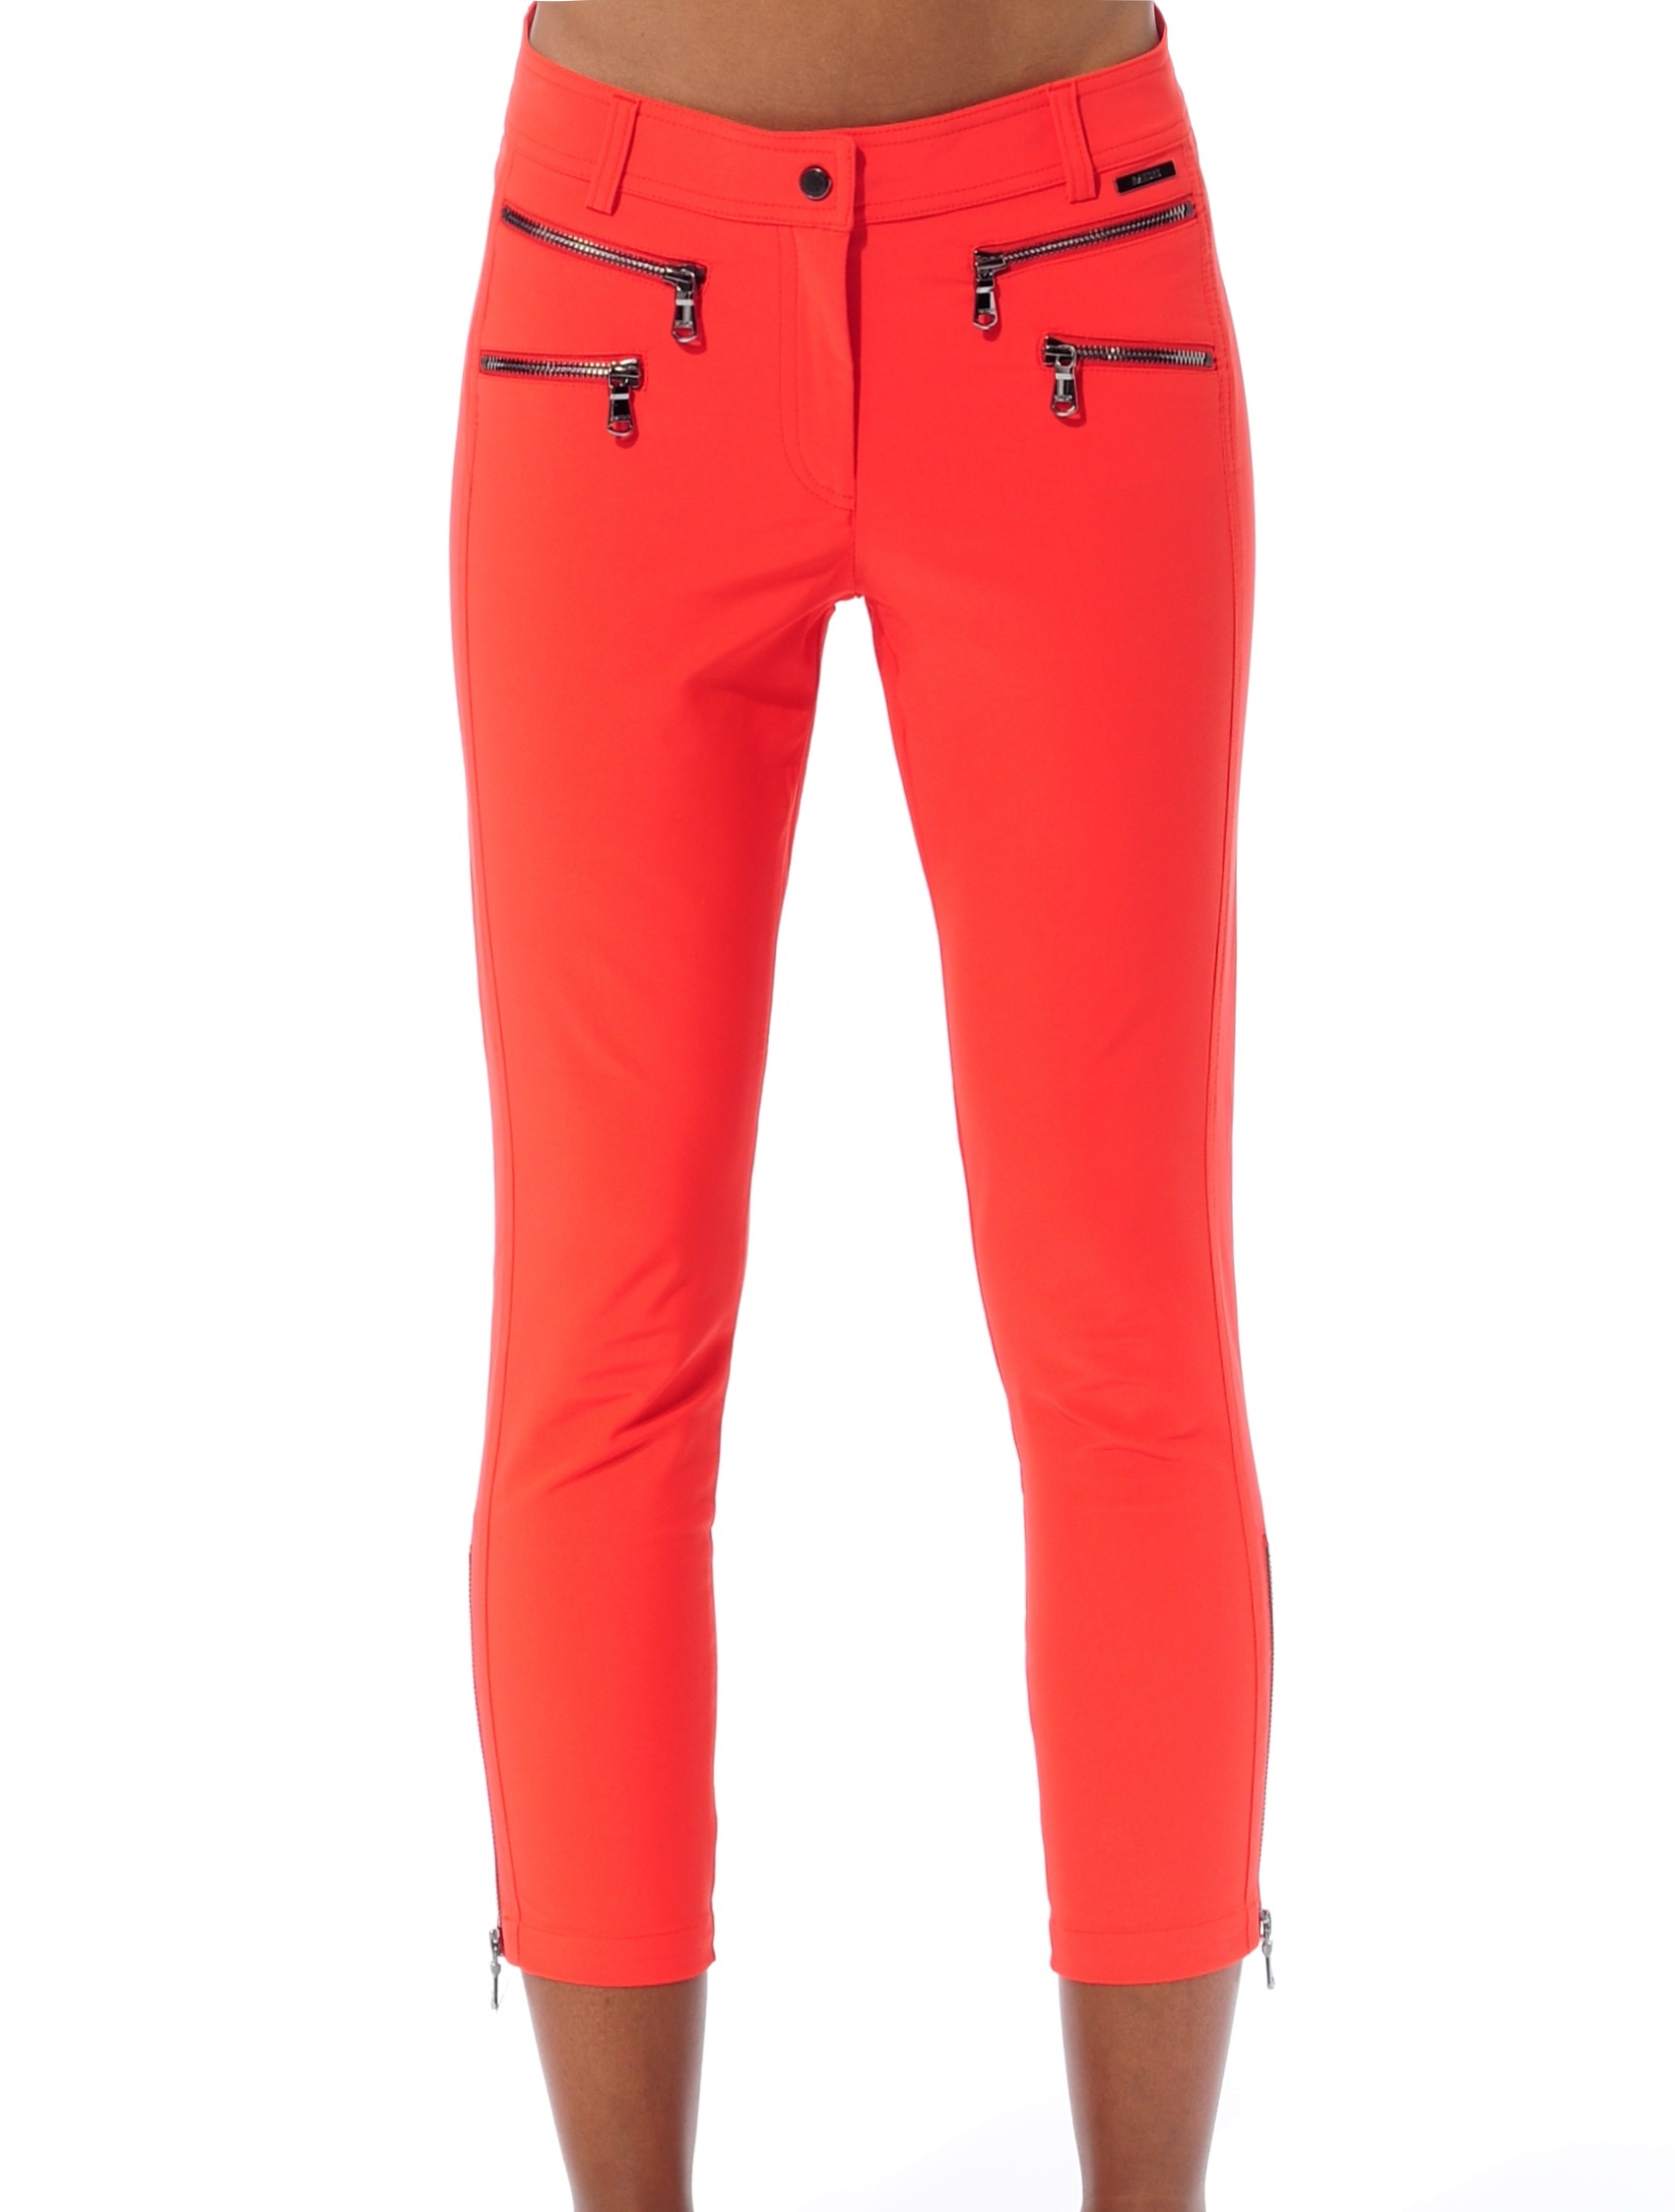 4way stretch double zip cropped pants grapefruit 